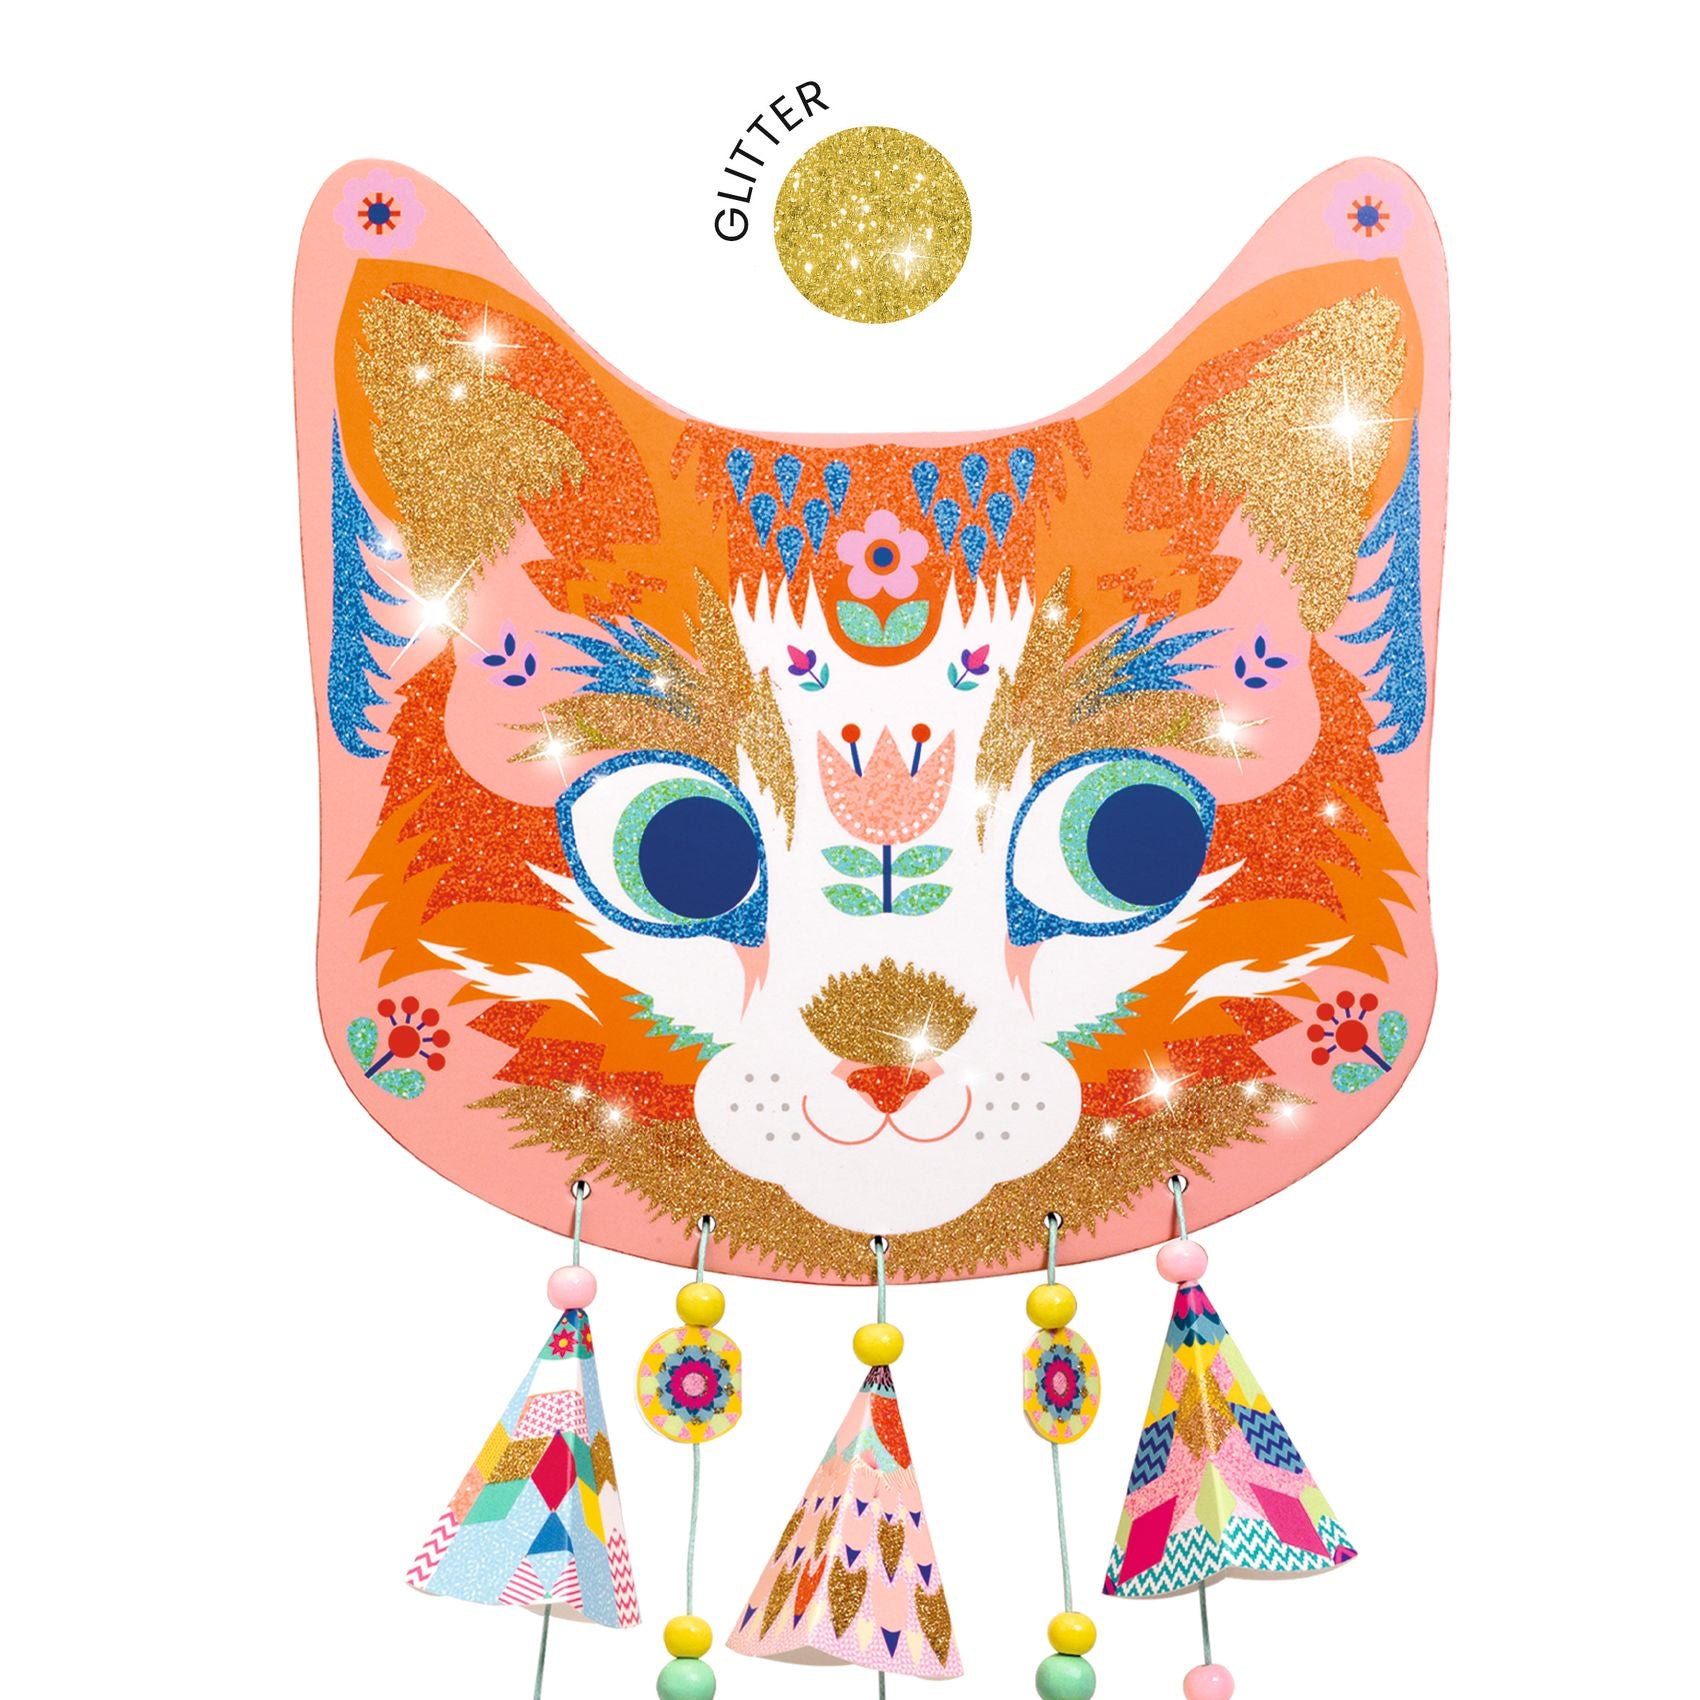 Djeco Do It Yourself Wind Chime – Kitty